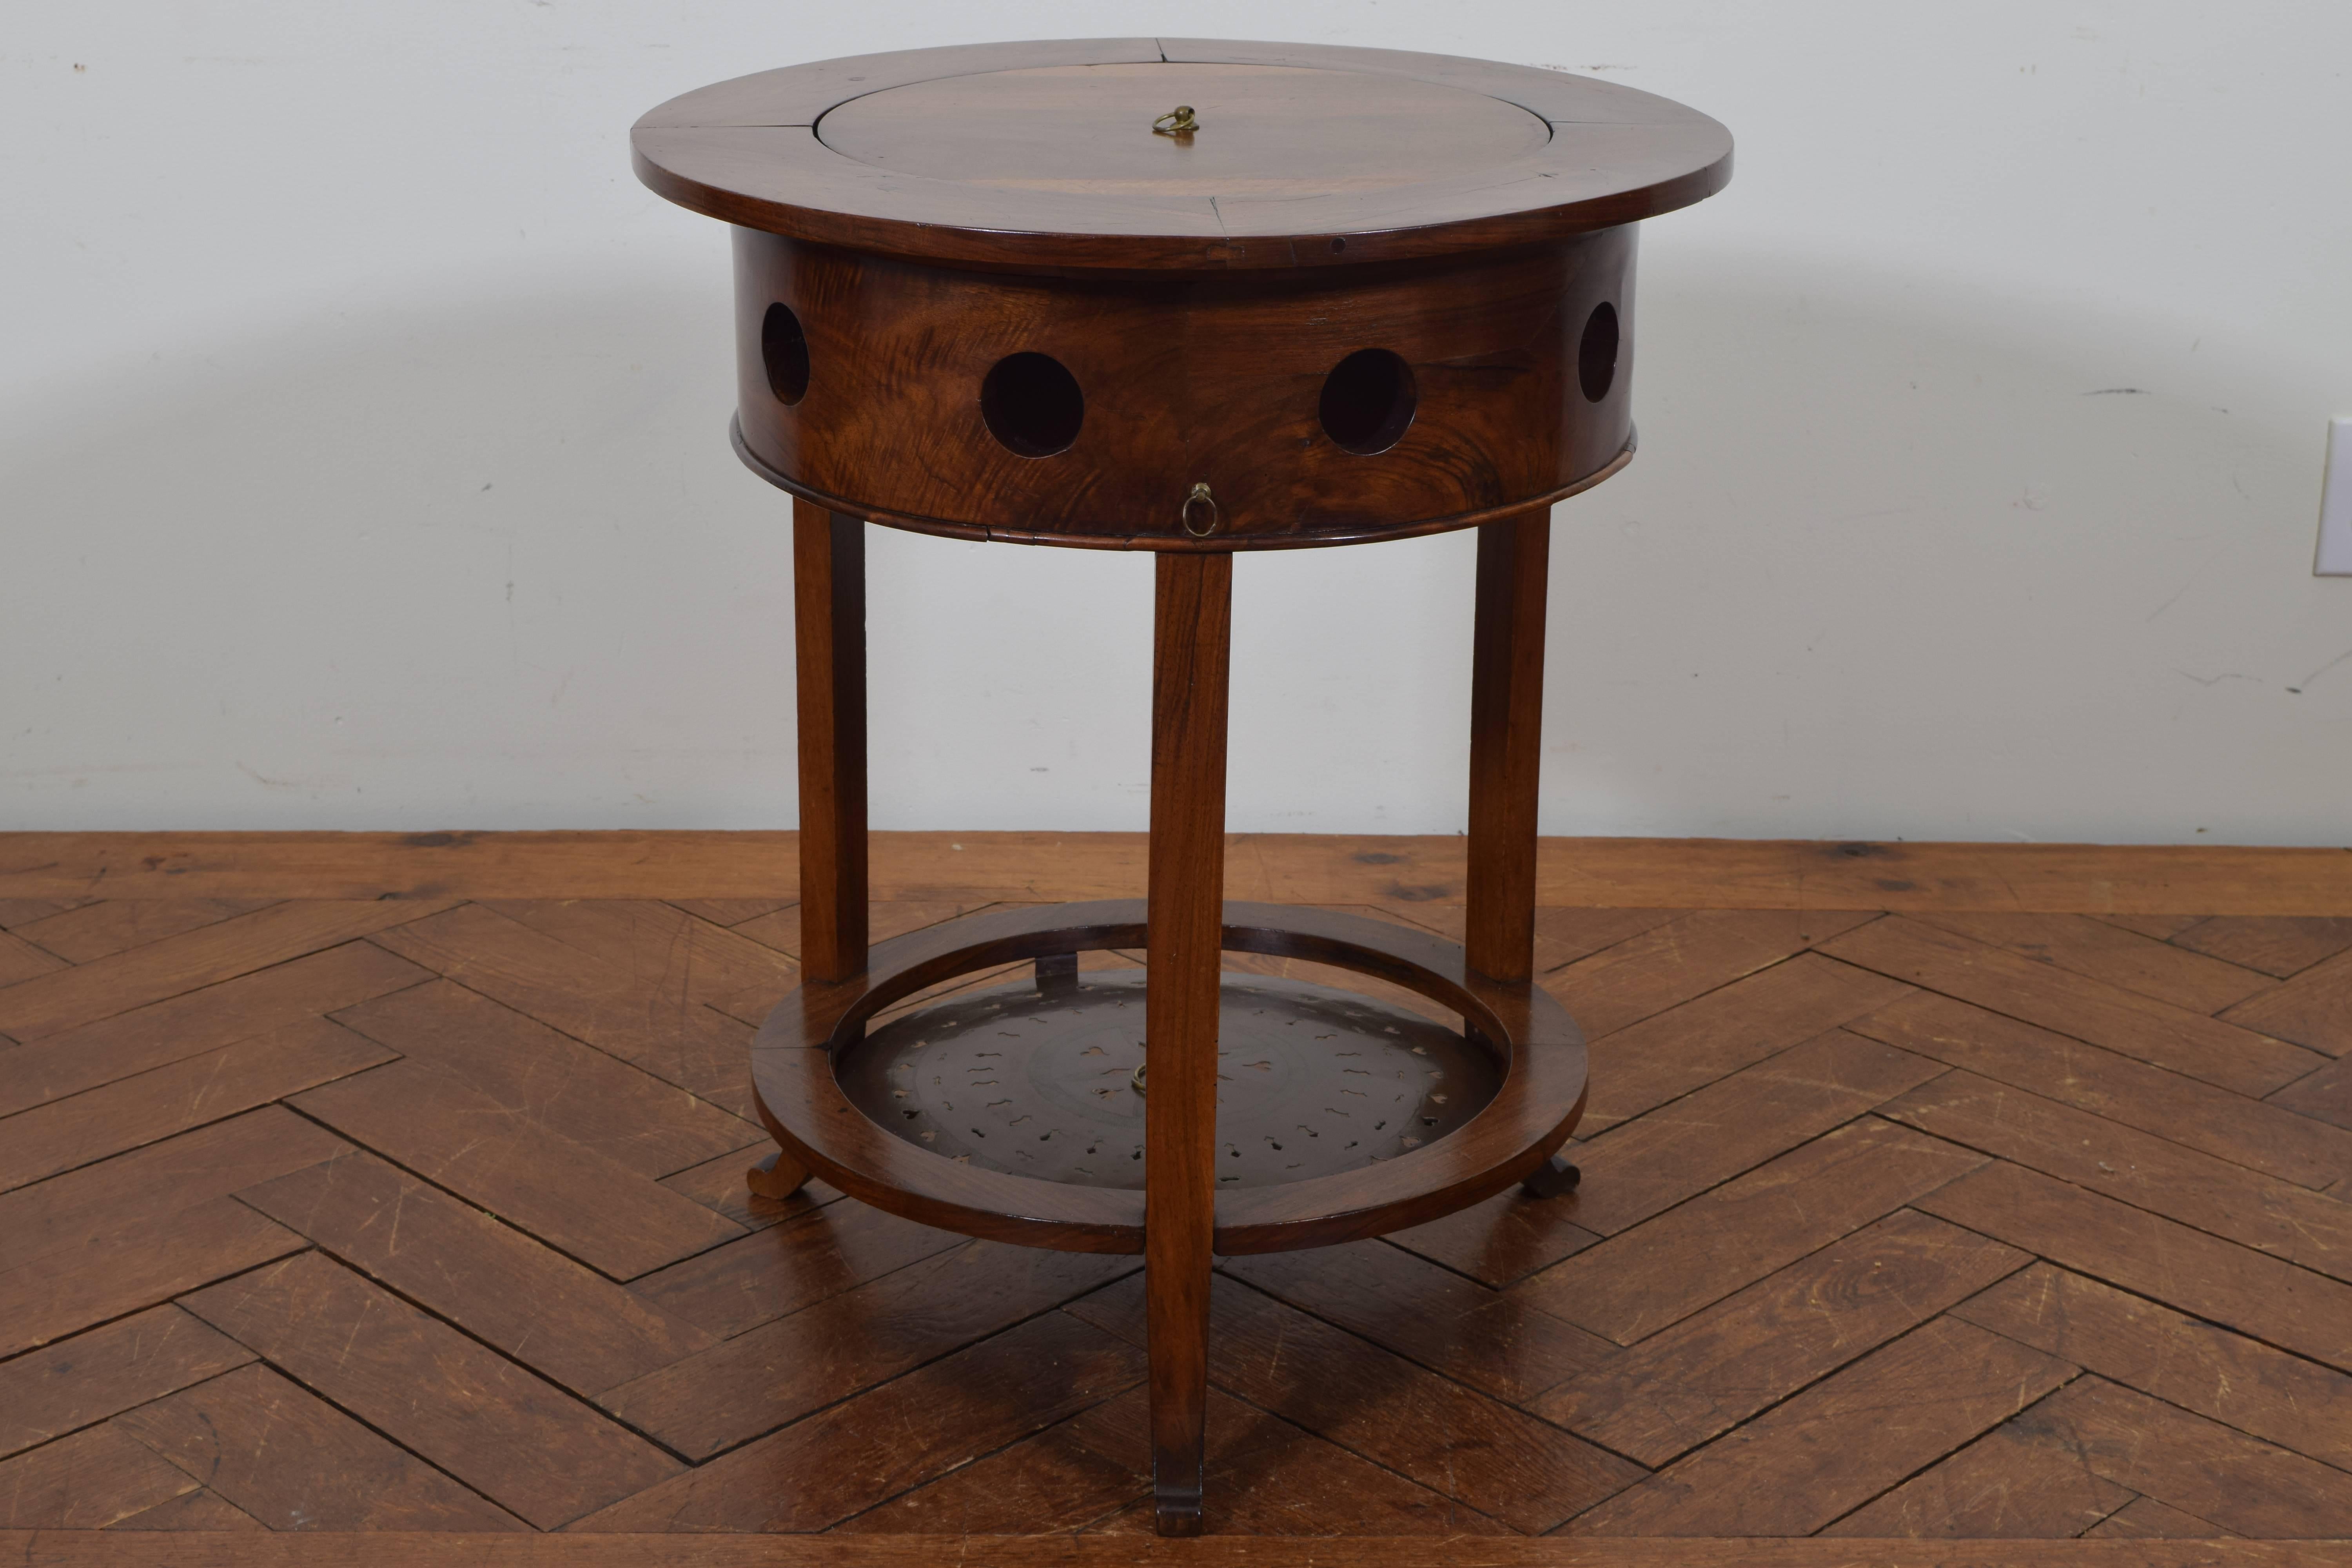 This very unique metamorphic table has a removable round top and an inner metal framework at the upper and lower sections that holds a brazier which was used to hold coals for warmth, the side vents allowing the heat to escape the table. It can be